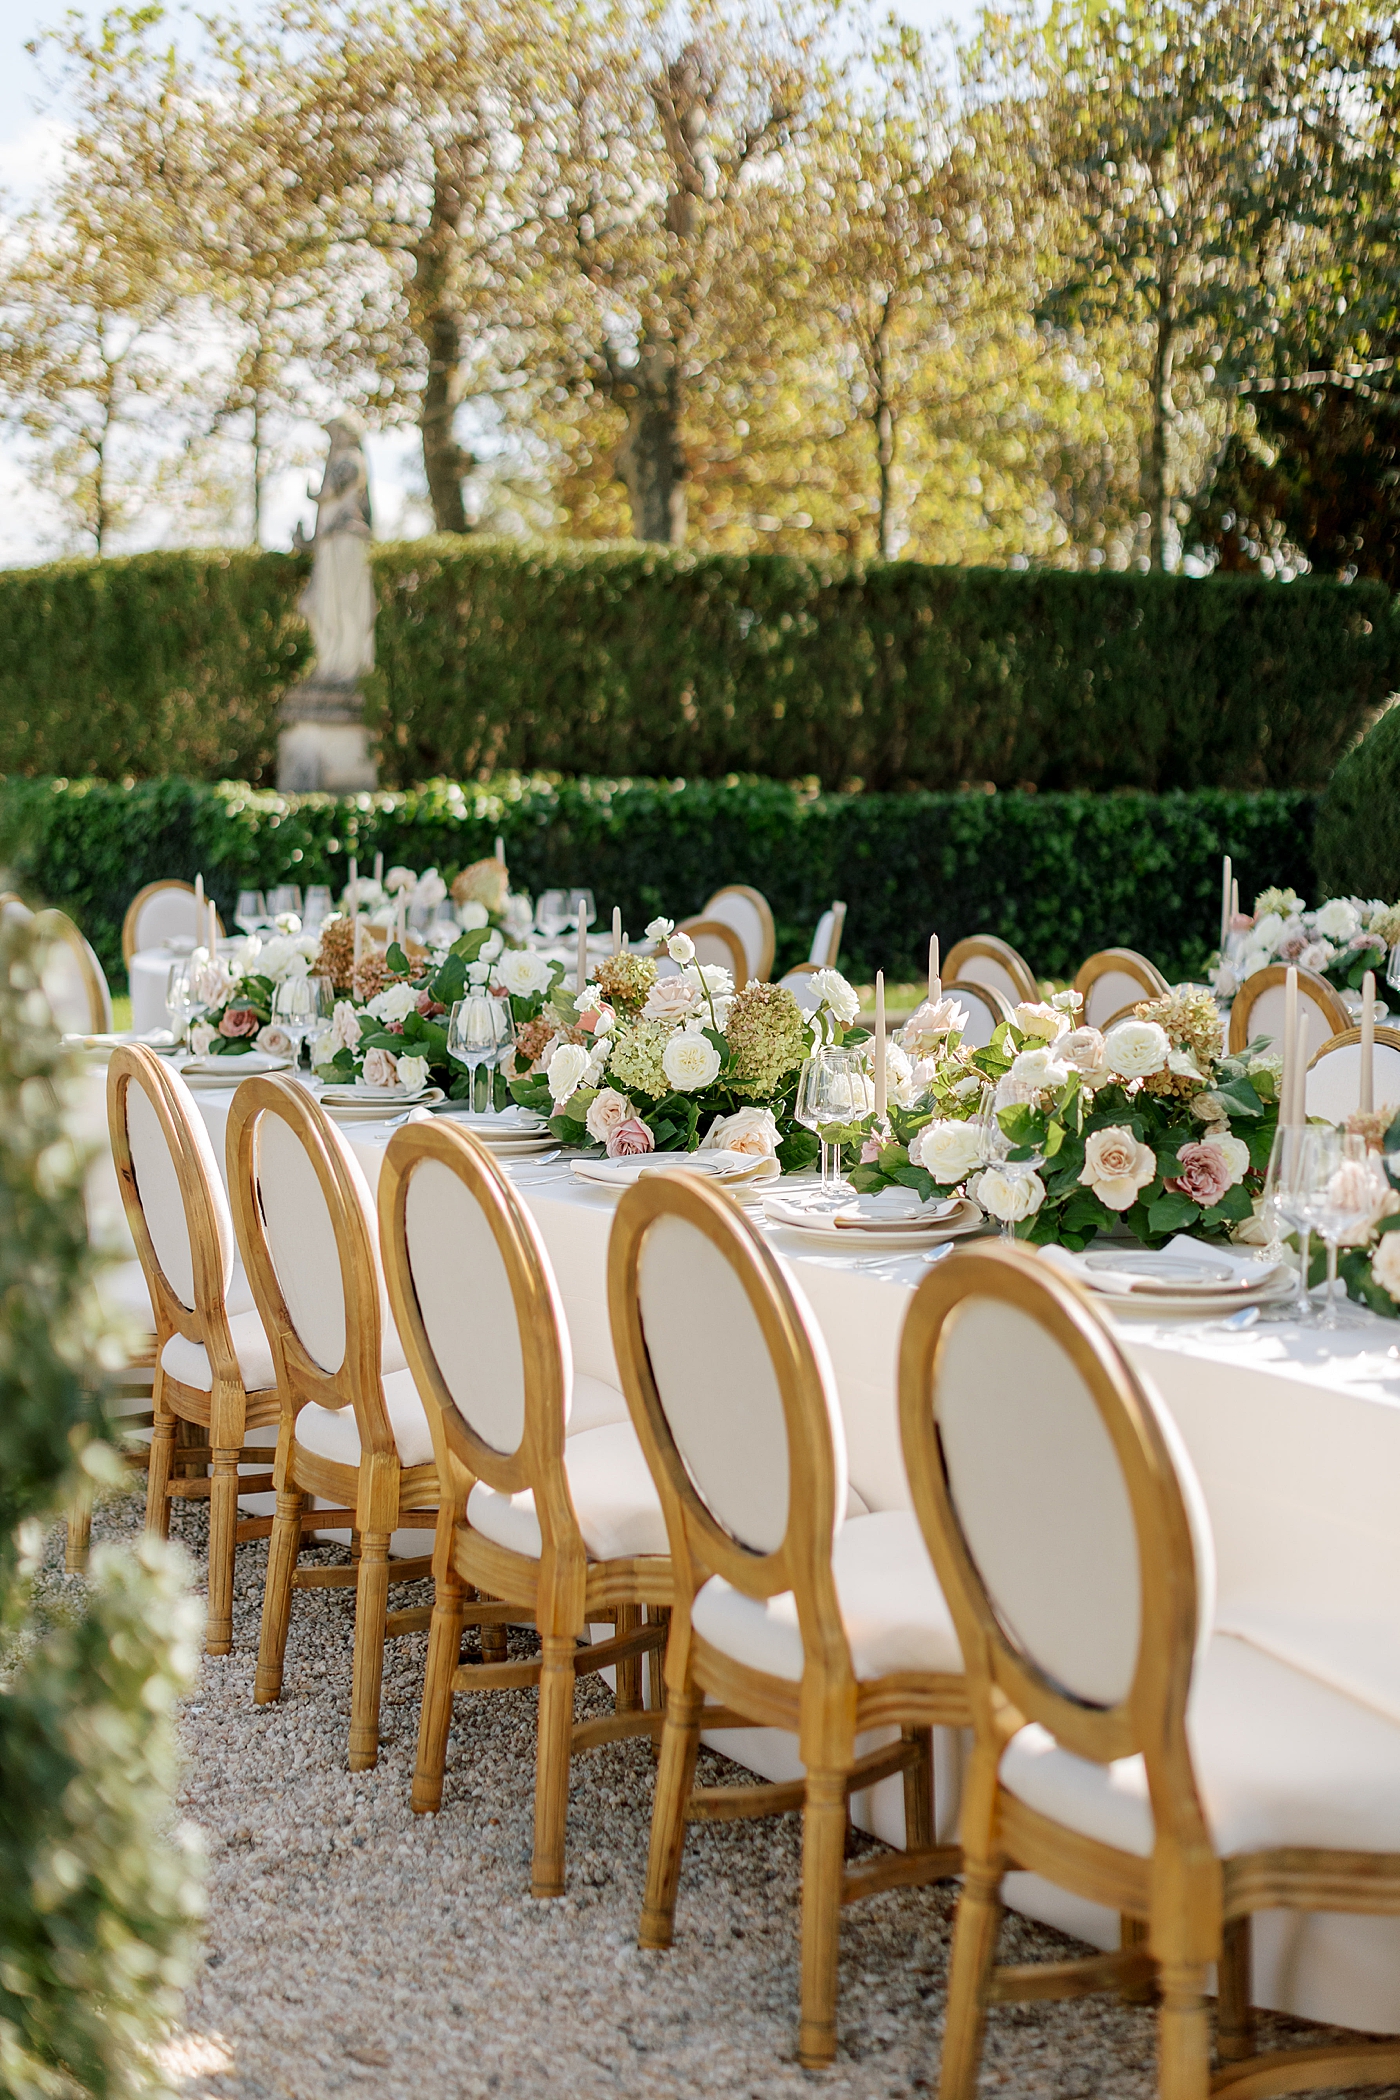 Details of a table setting with white and dusty pink flowers and white table cloths in a European garden during Oheka castle wedding | Image by Hope Helmuth Photography